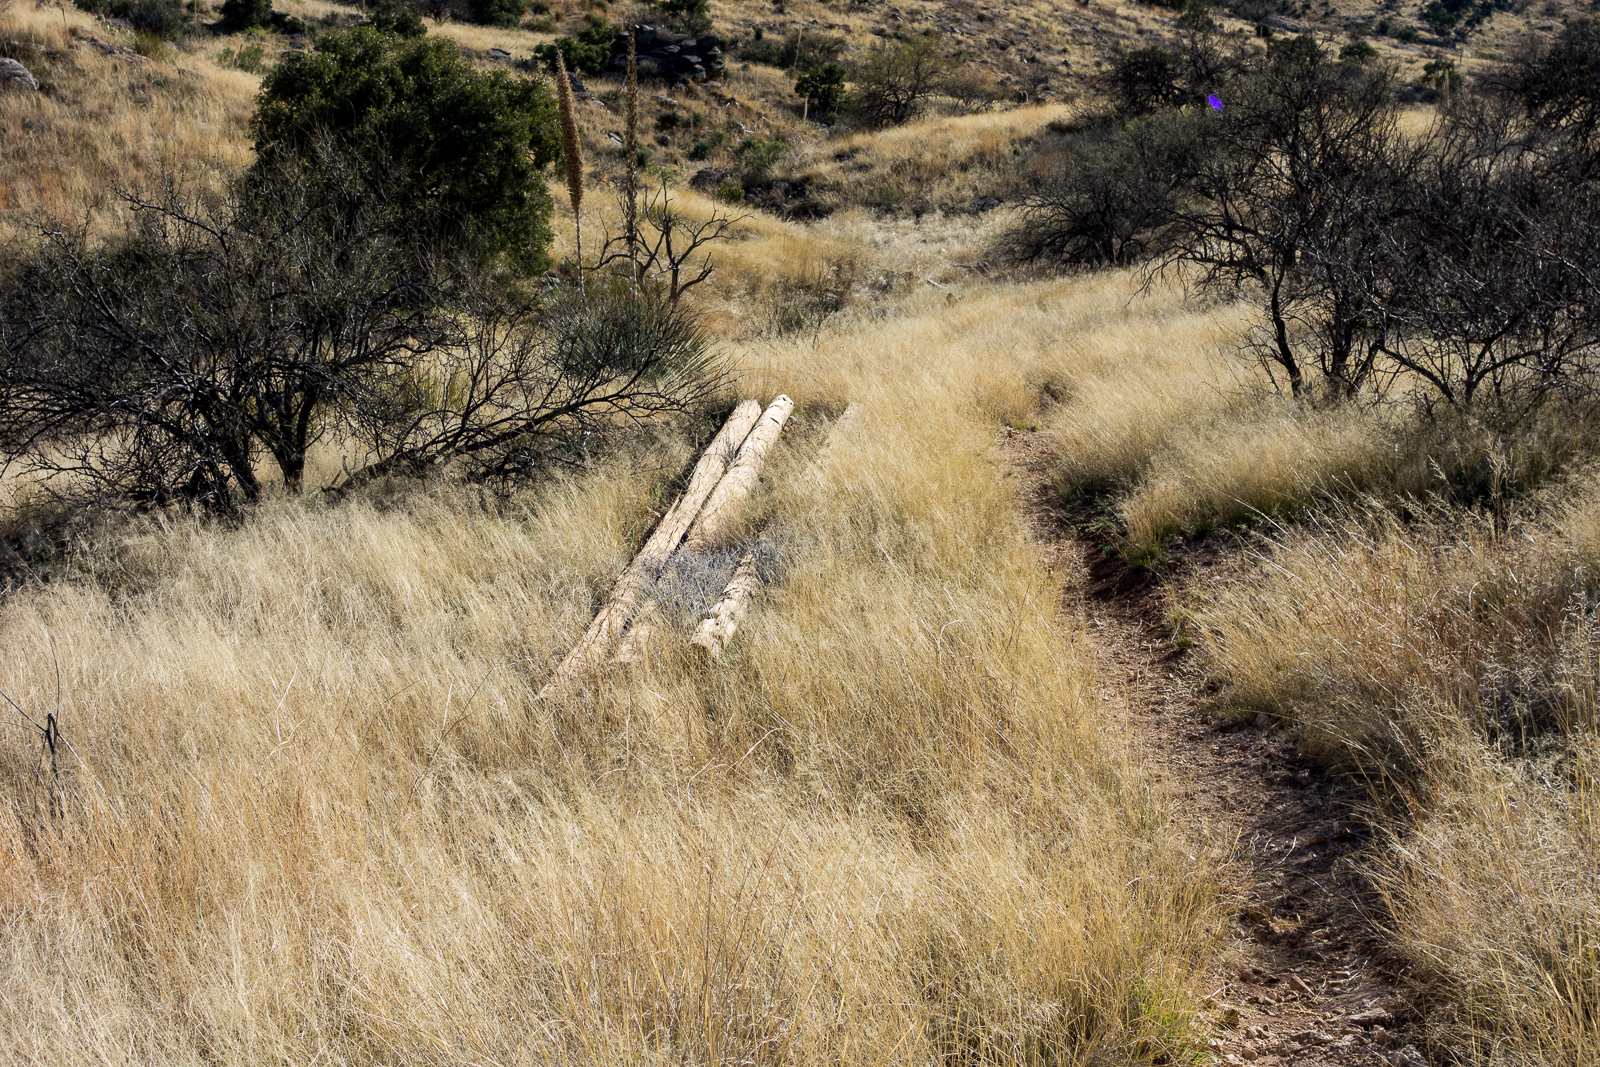 Power poles along the Soldier Trail - at one time these provided power to the Prison Camp. February 2016.